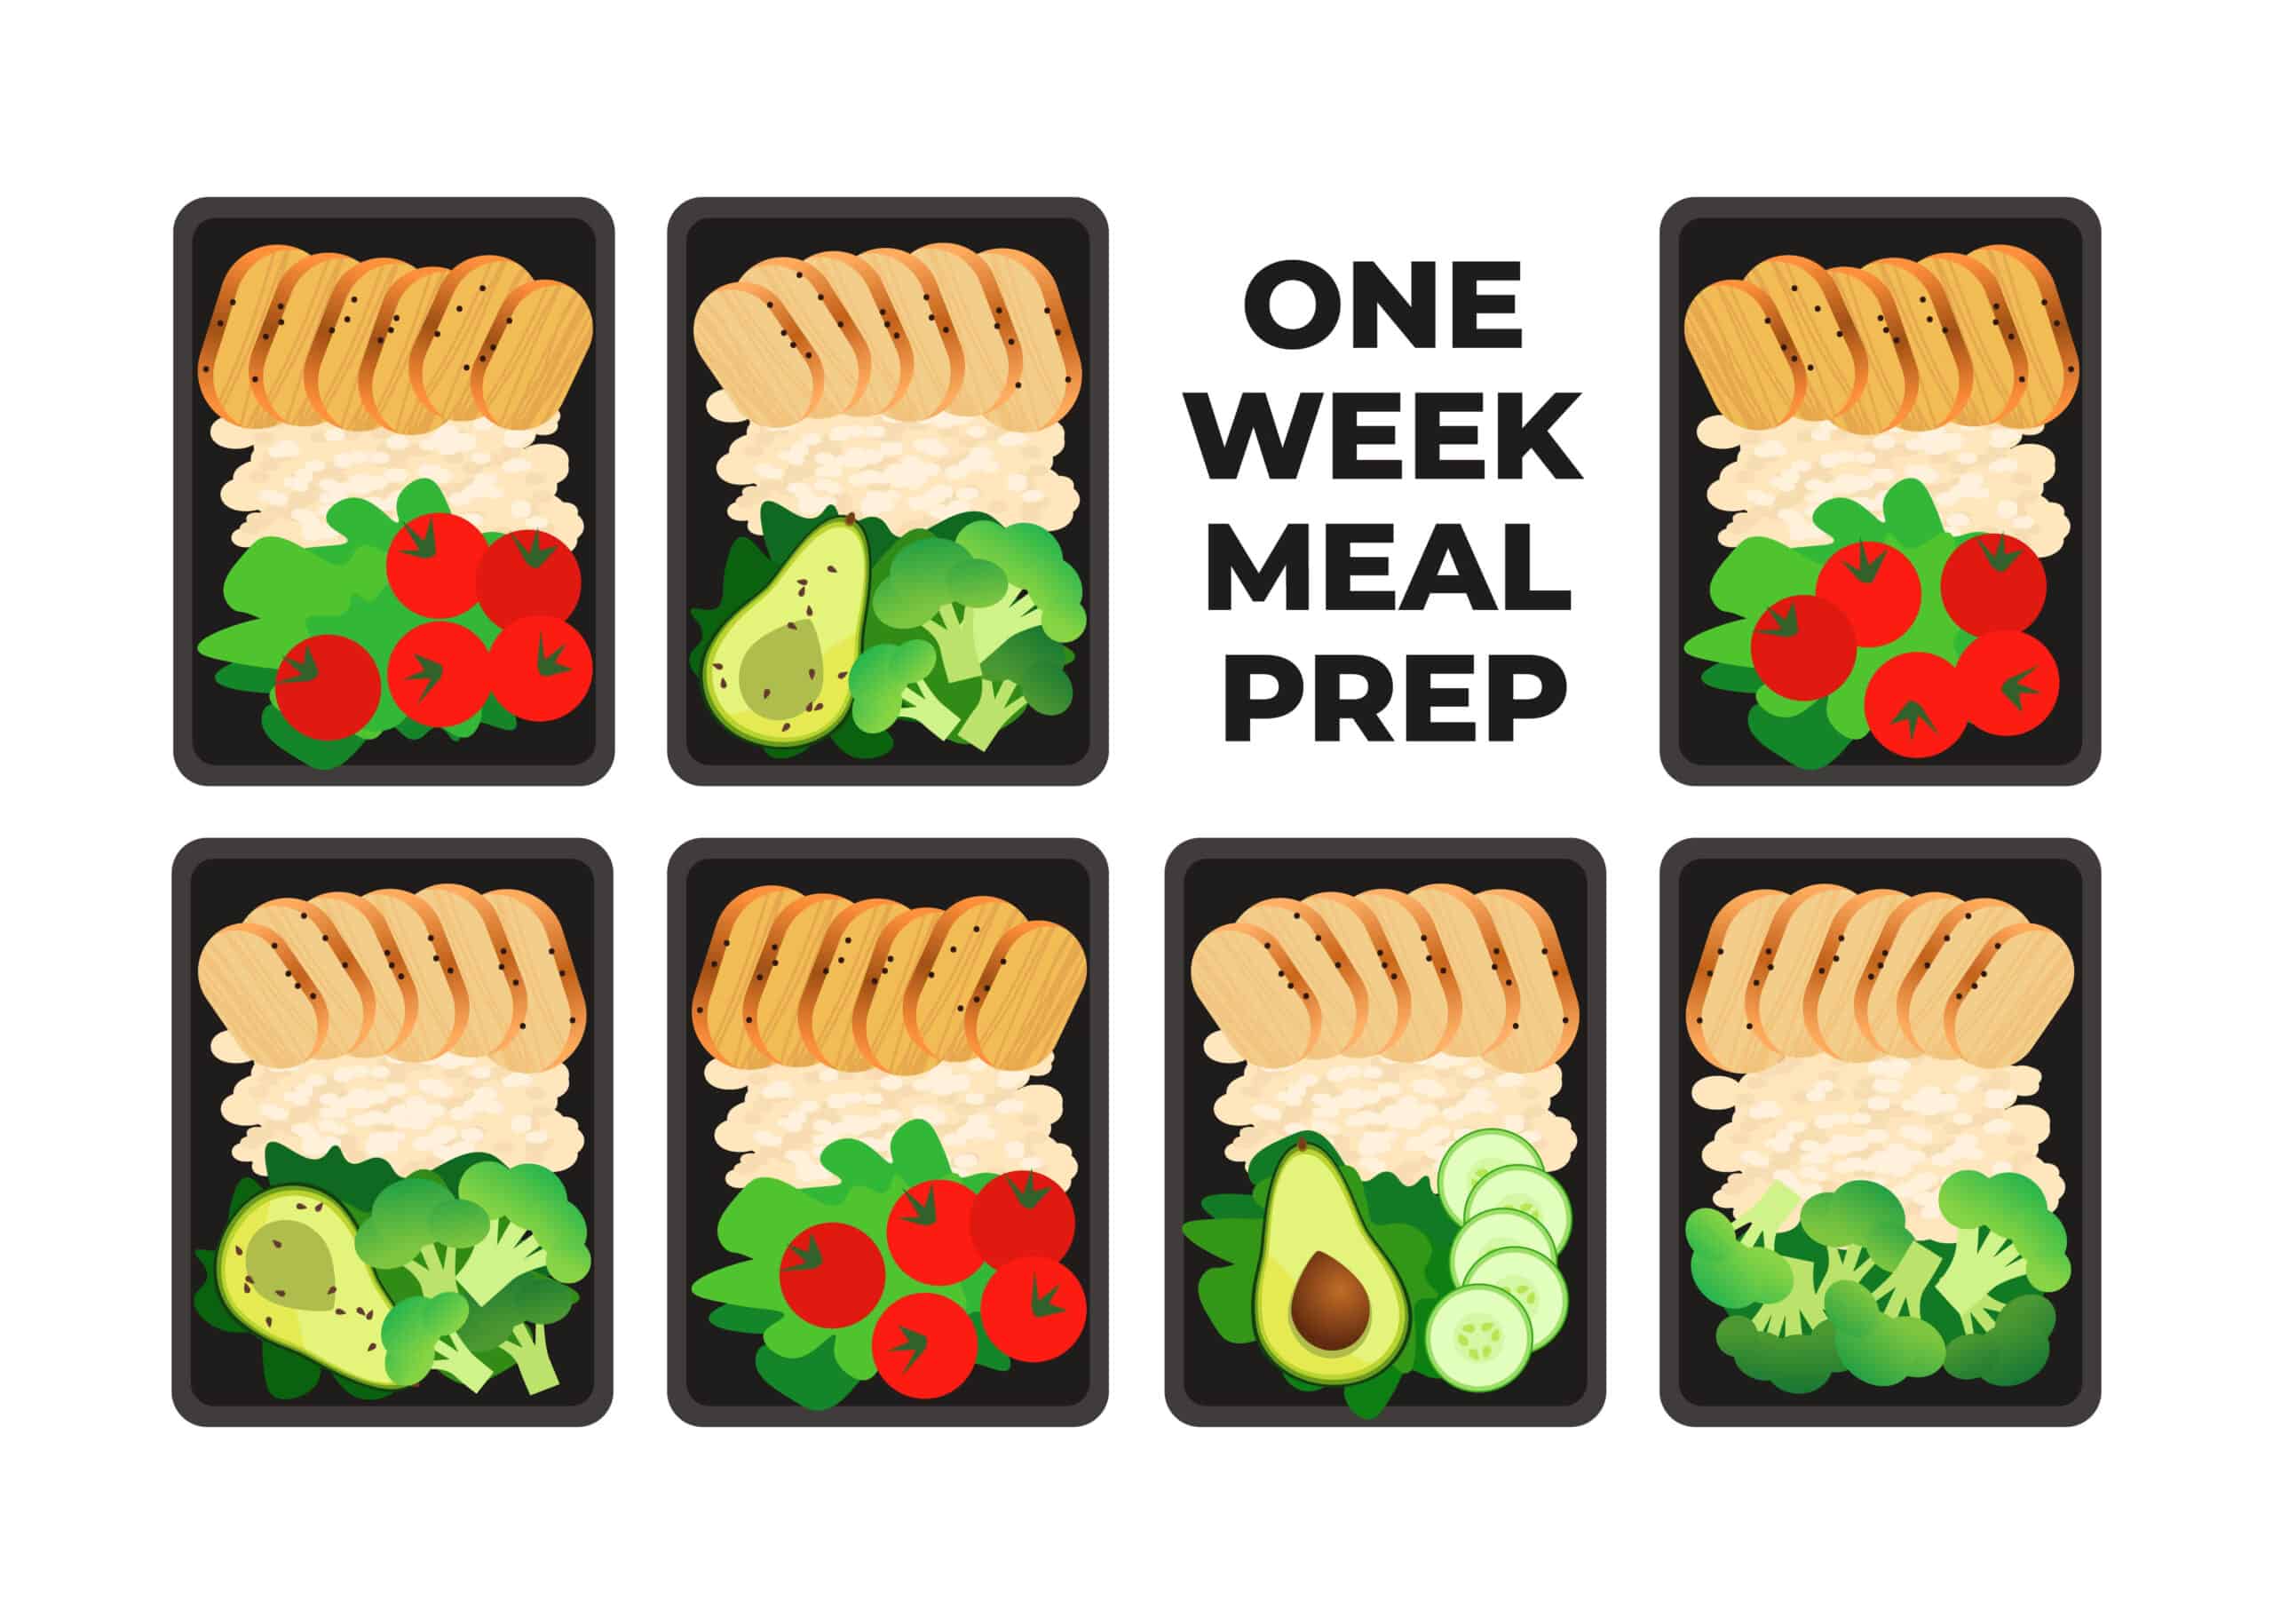 How to Meal Prep for the Week